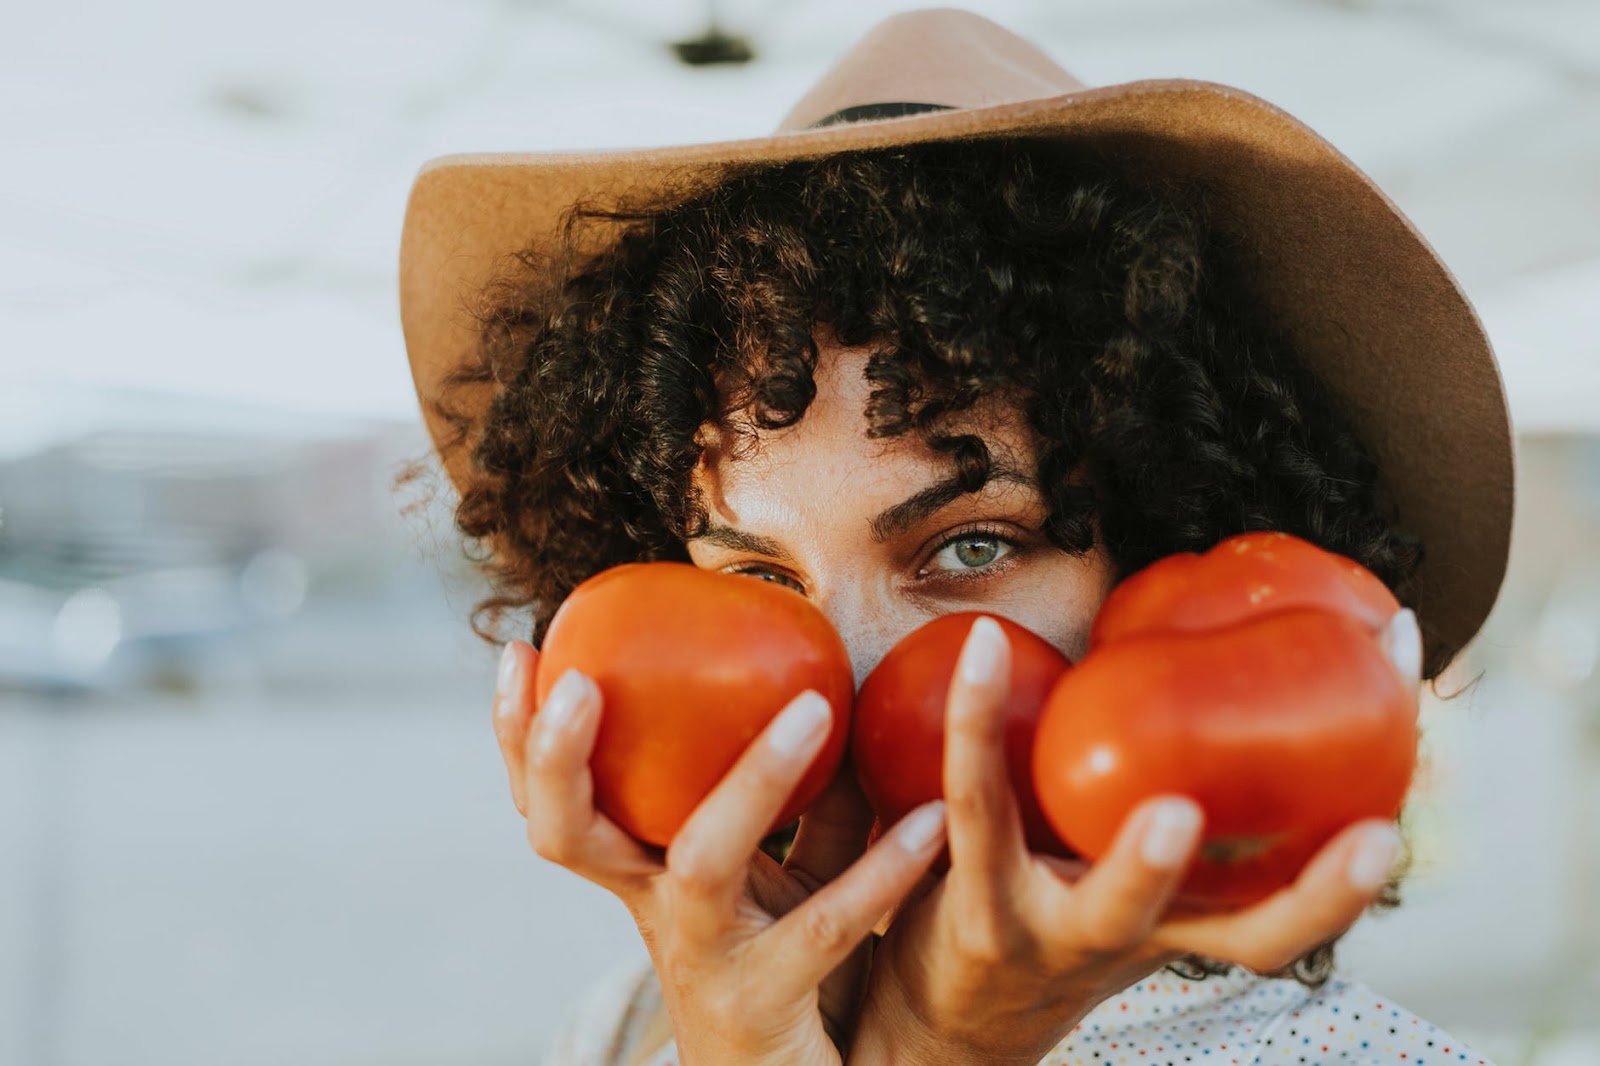 A curly haired woman with a wide hat holding tomatoes in front of her face